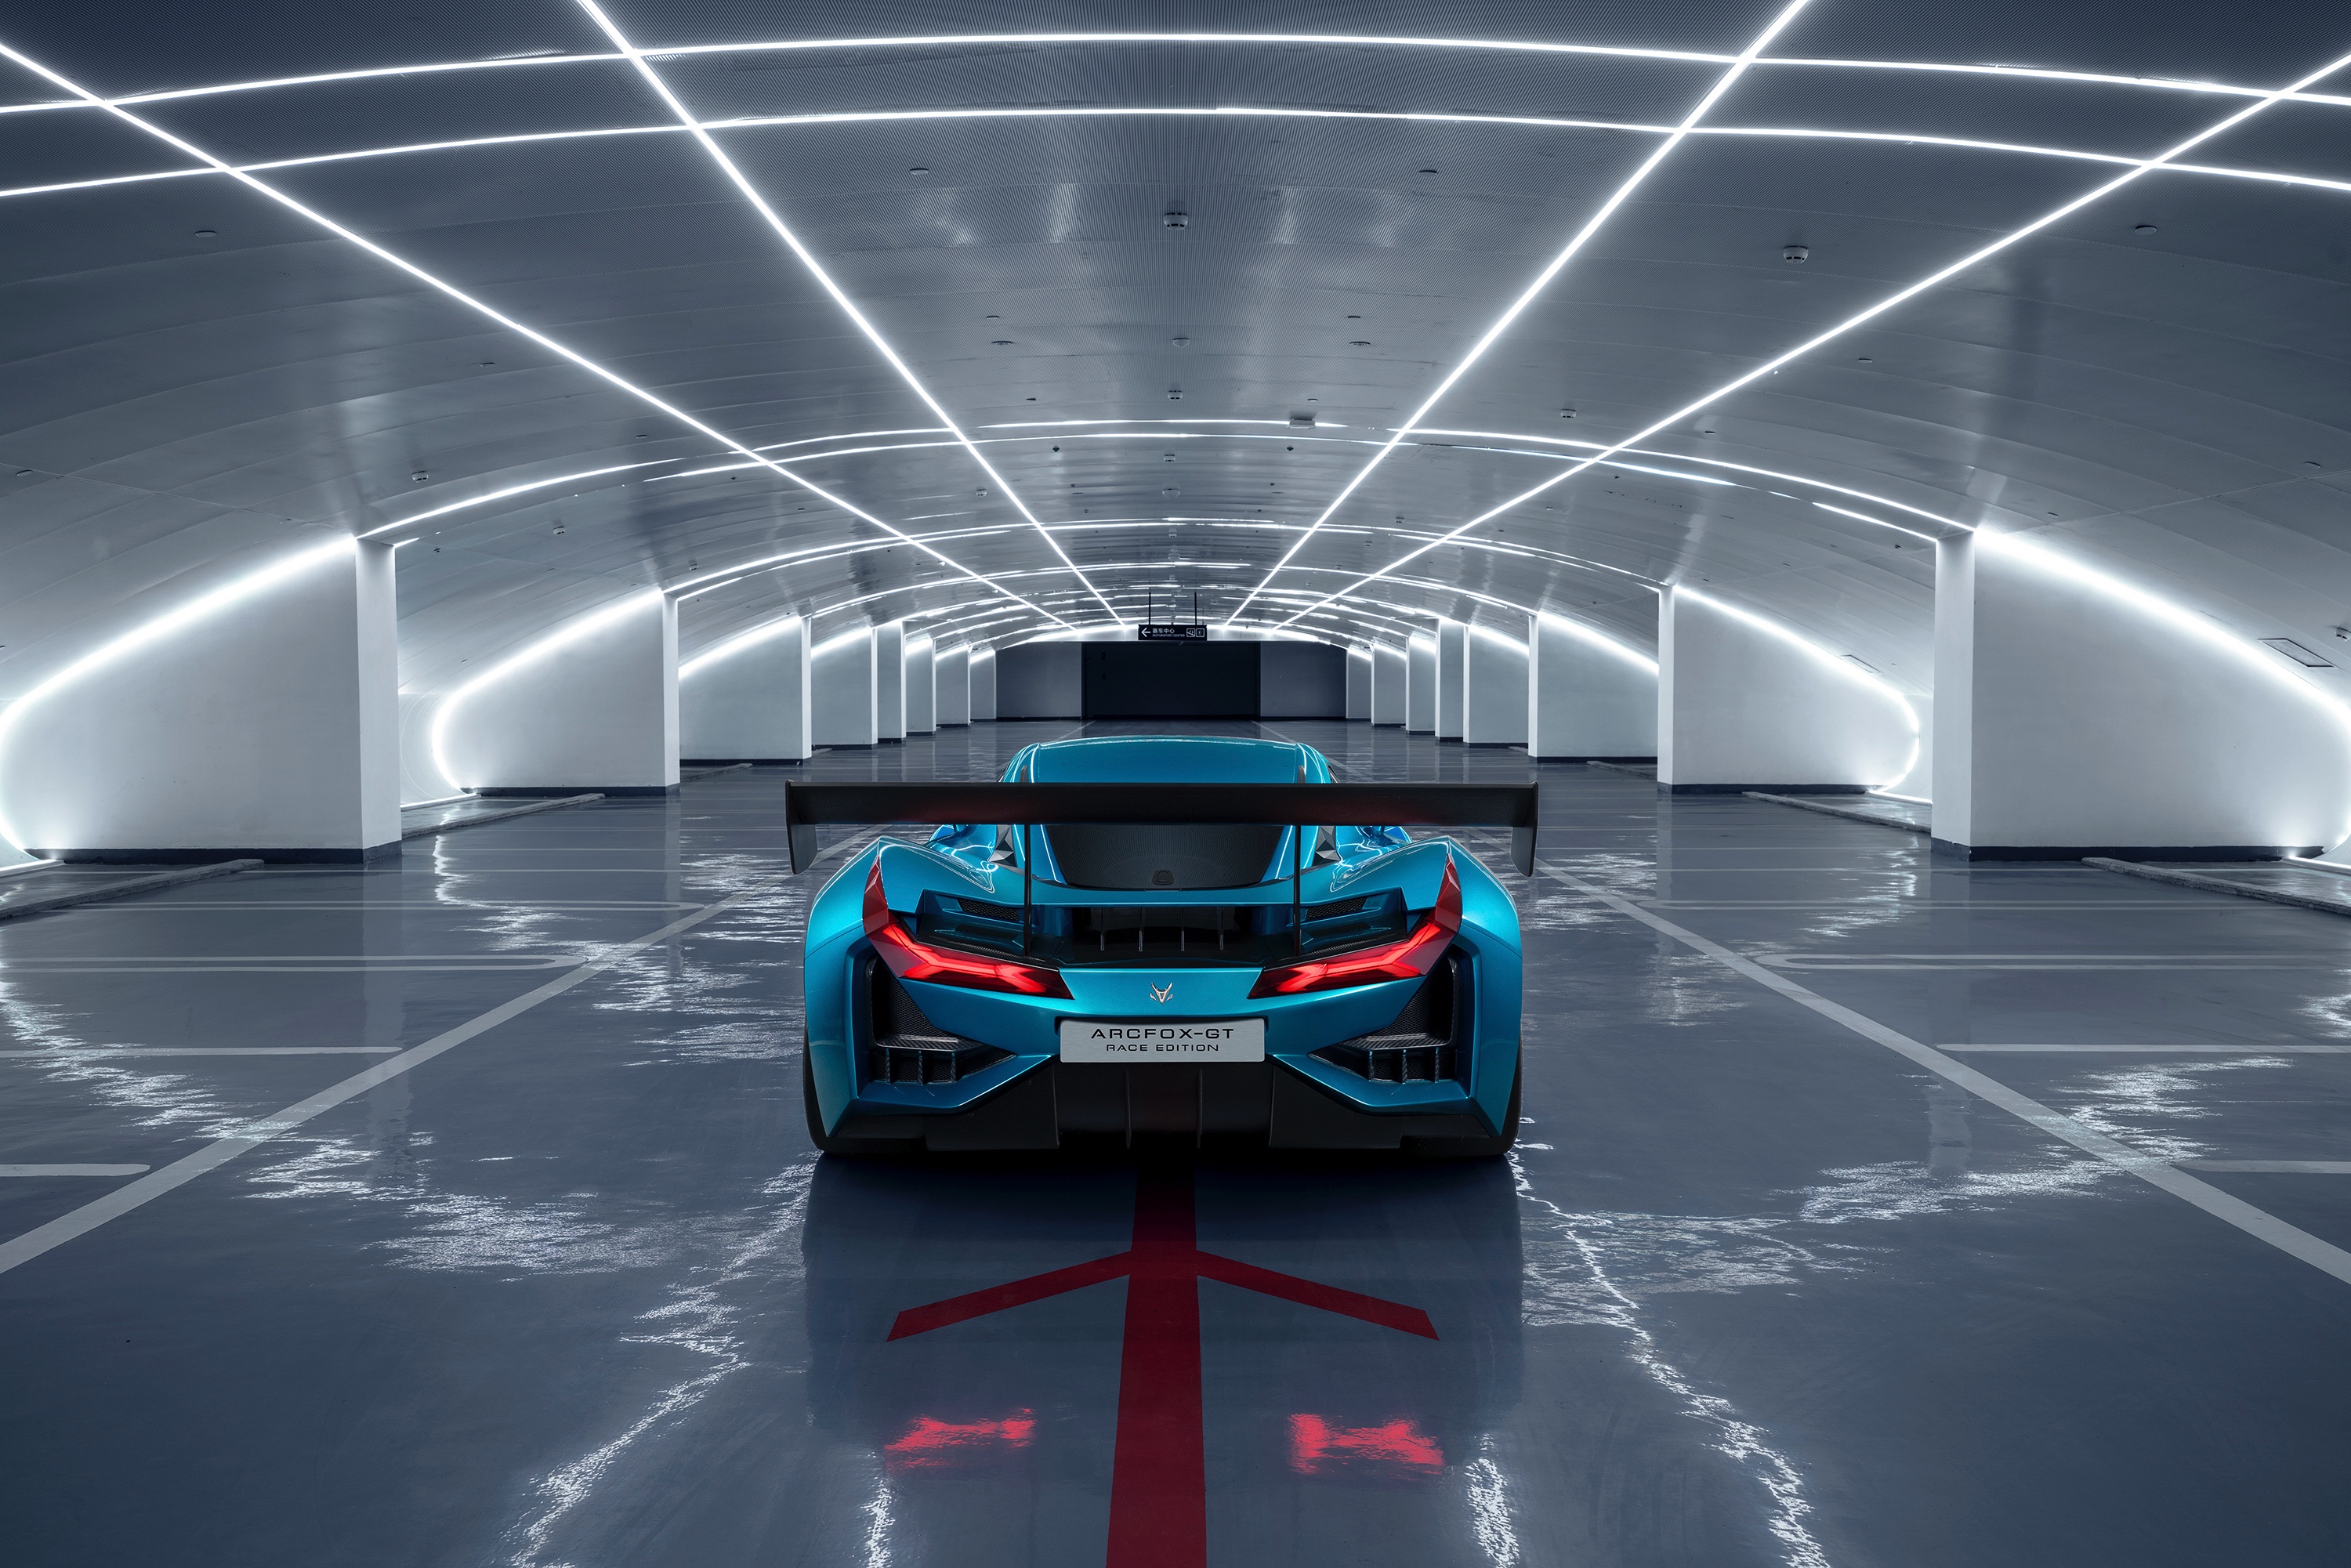 Arcfox GT Race Edition 2020 Rear 4k, HD Cars, 4k Wallpapers, Image, Backgrounds, Photos and Pictures